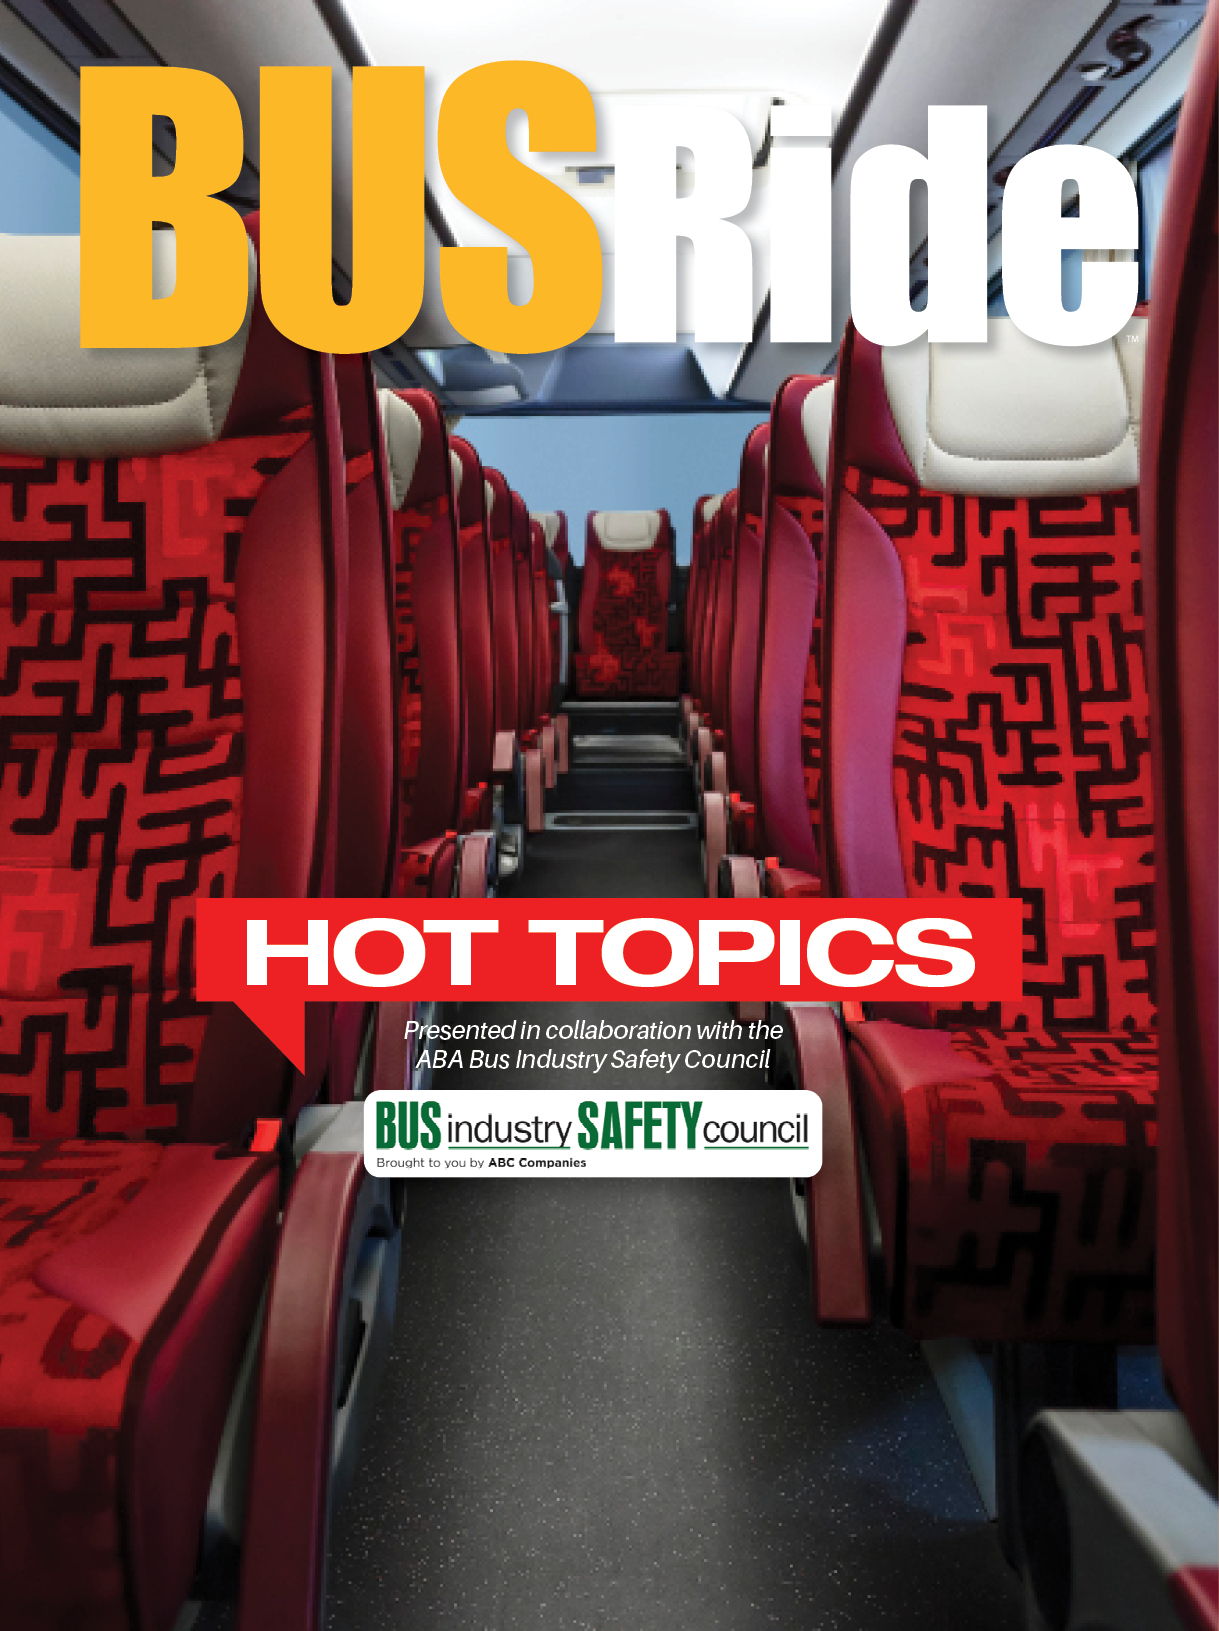 Hot Topics - Presented by the Bus Industry Safety Council (BISC)